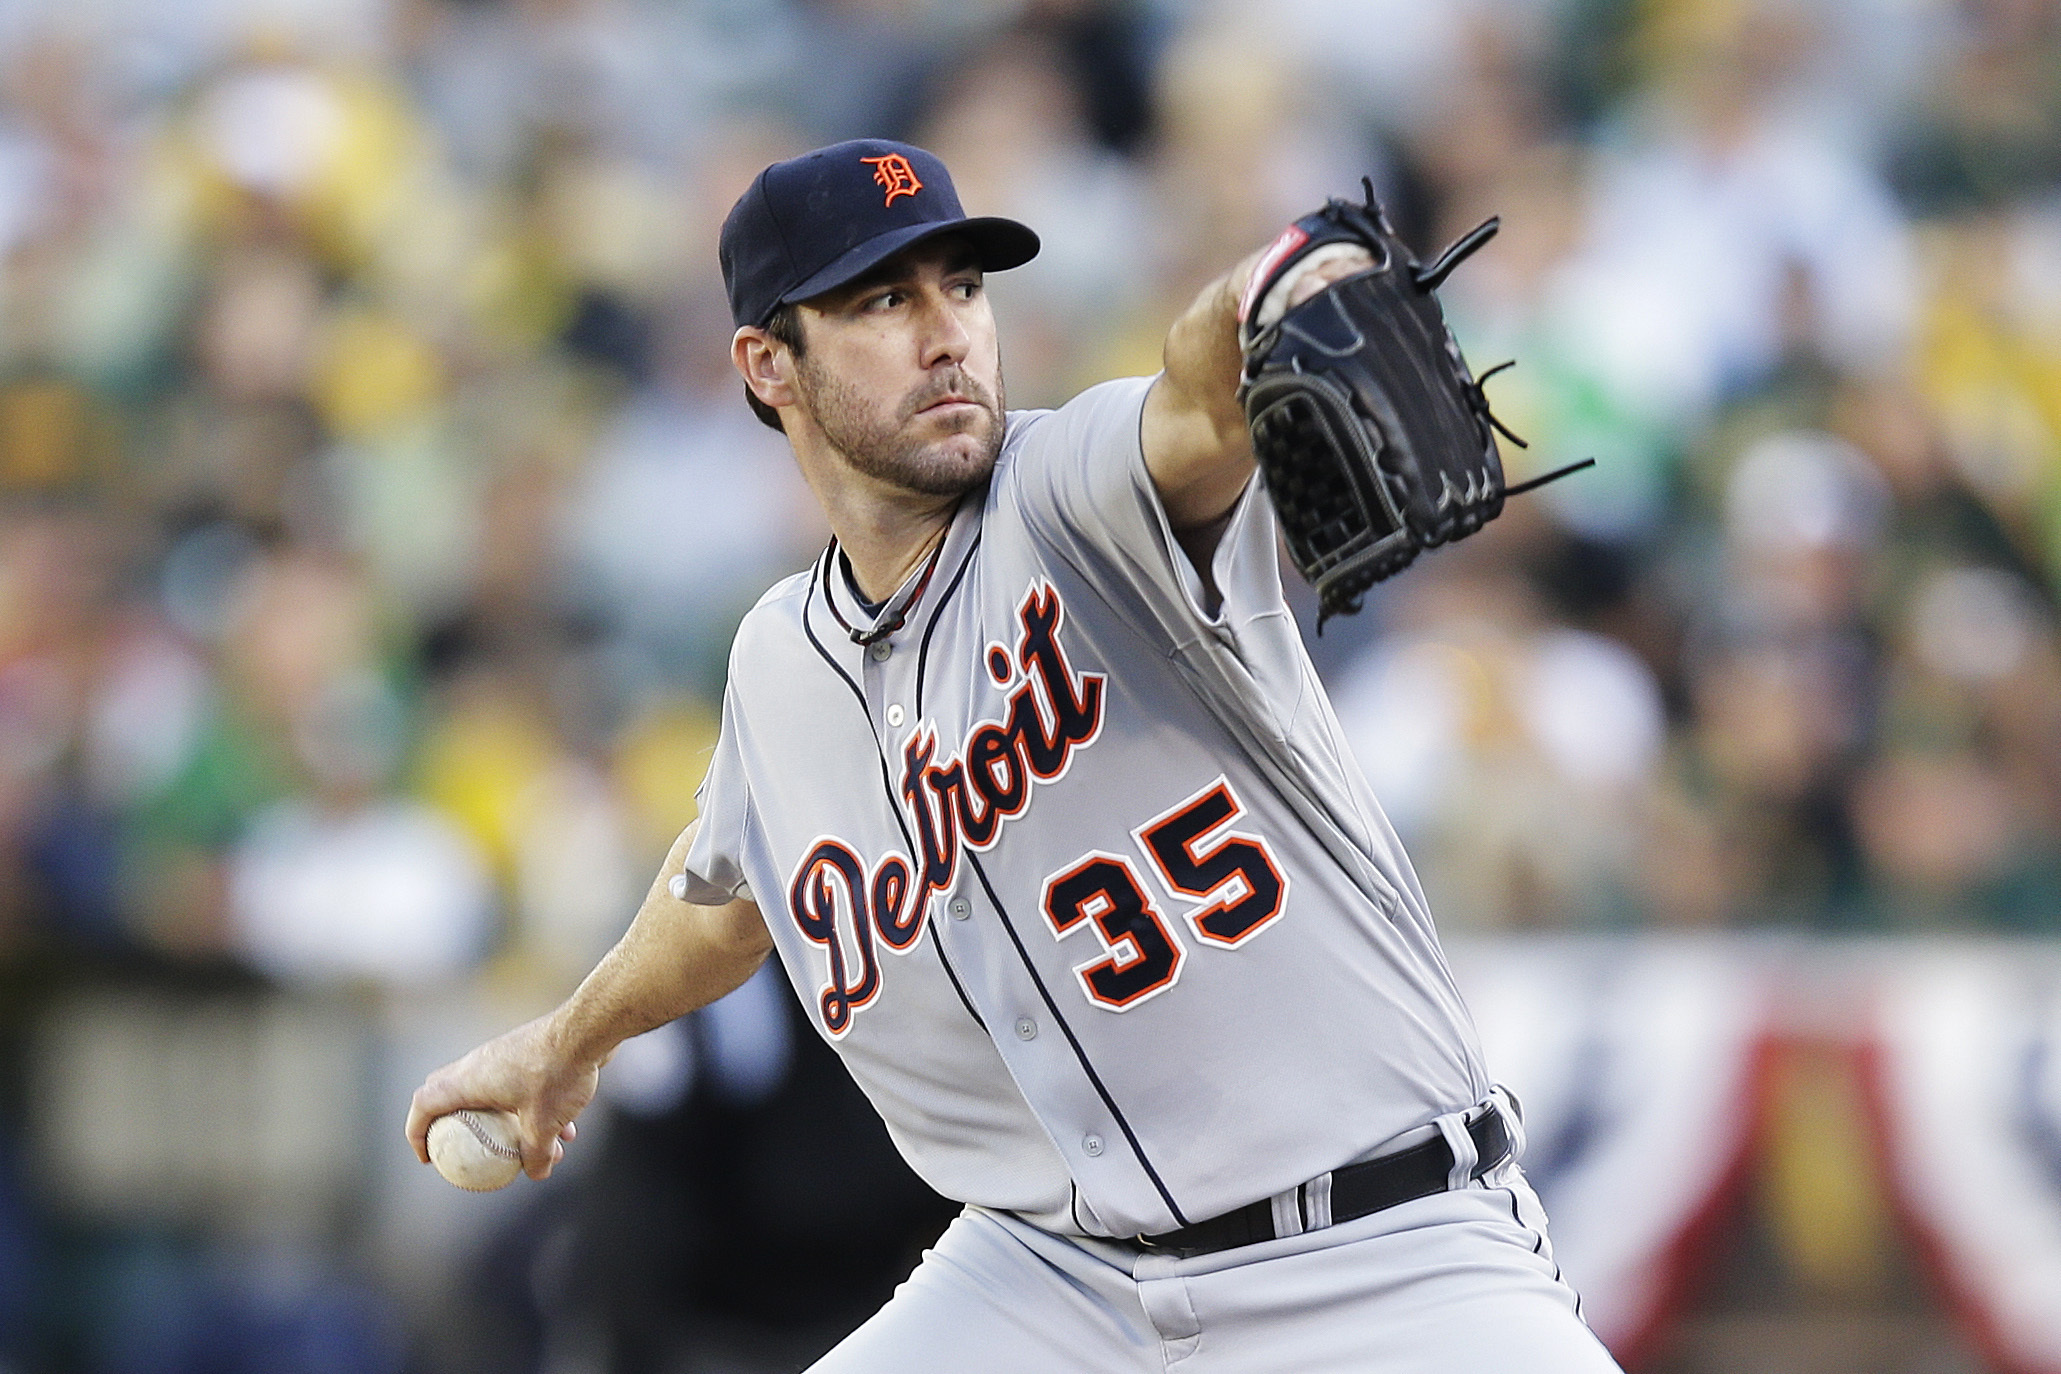 Tigers 7, Red Sox 3: Jake Peavy, Dustin Pedroia blow Game 4